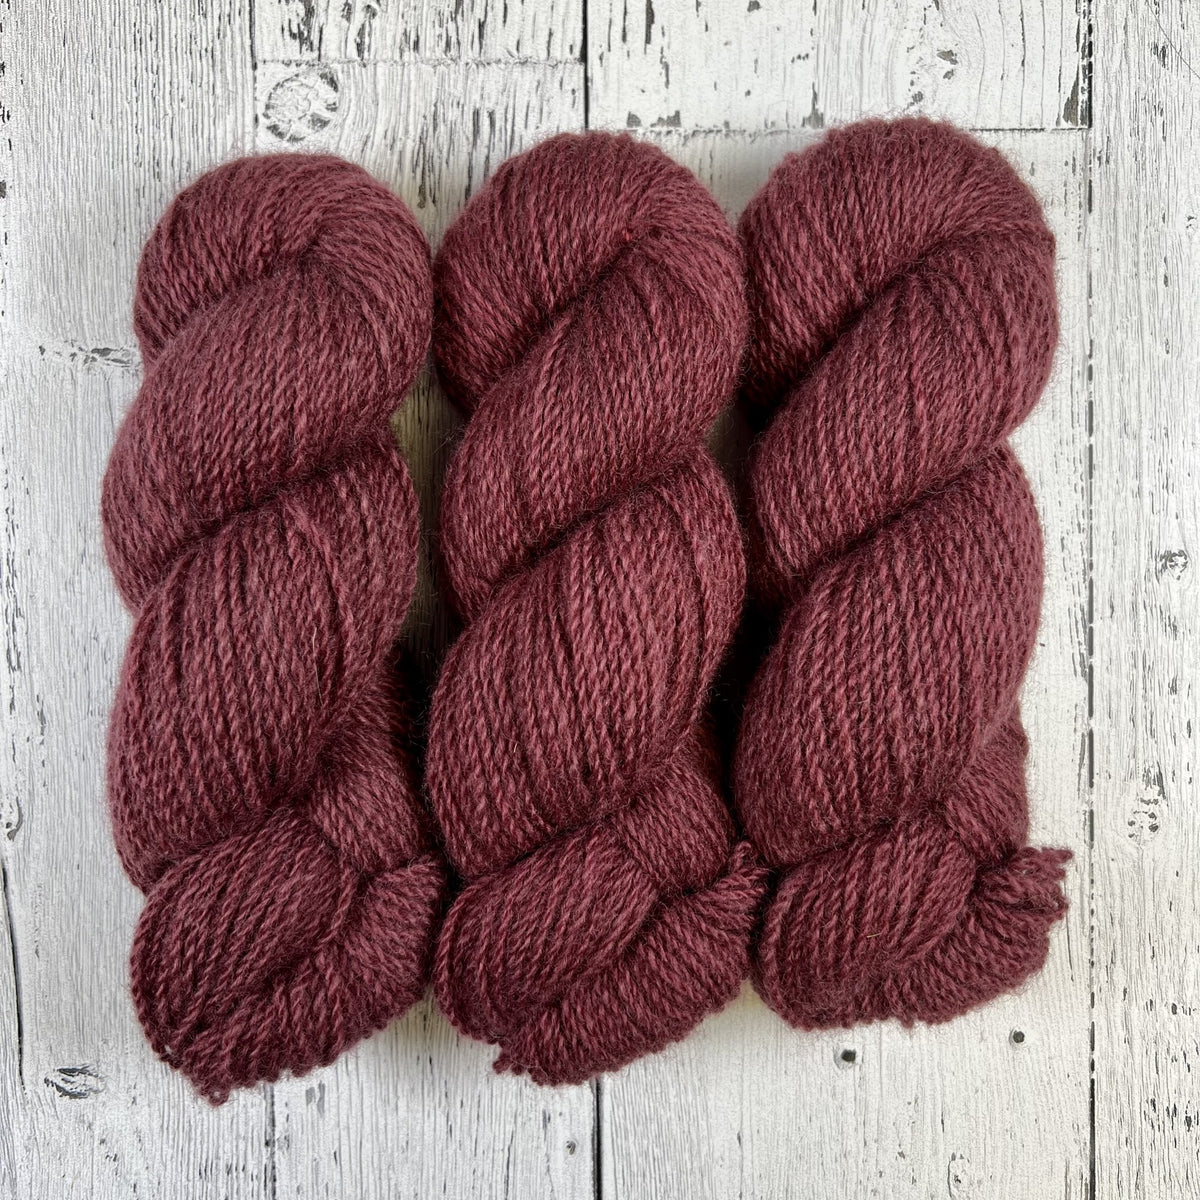 French Bordeaux - Heritage Batch 5 DK/Lt Worsted - Dyed Stock